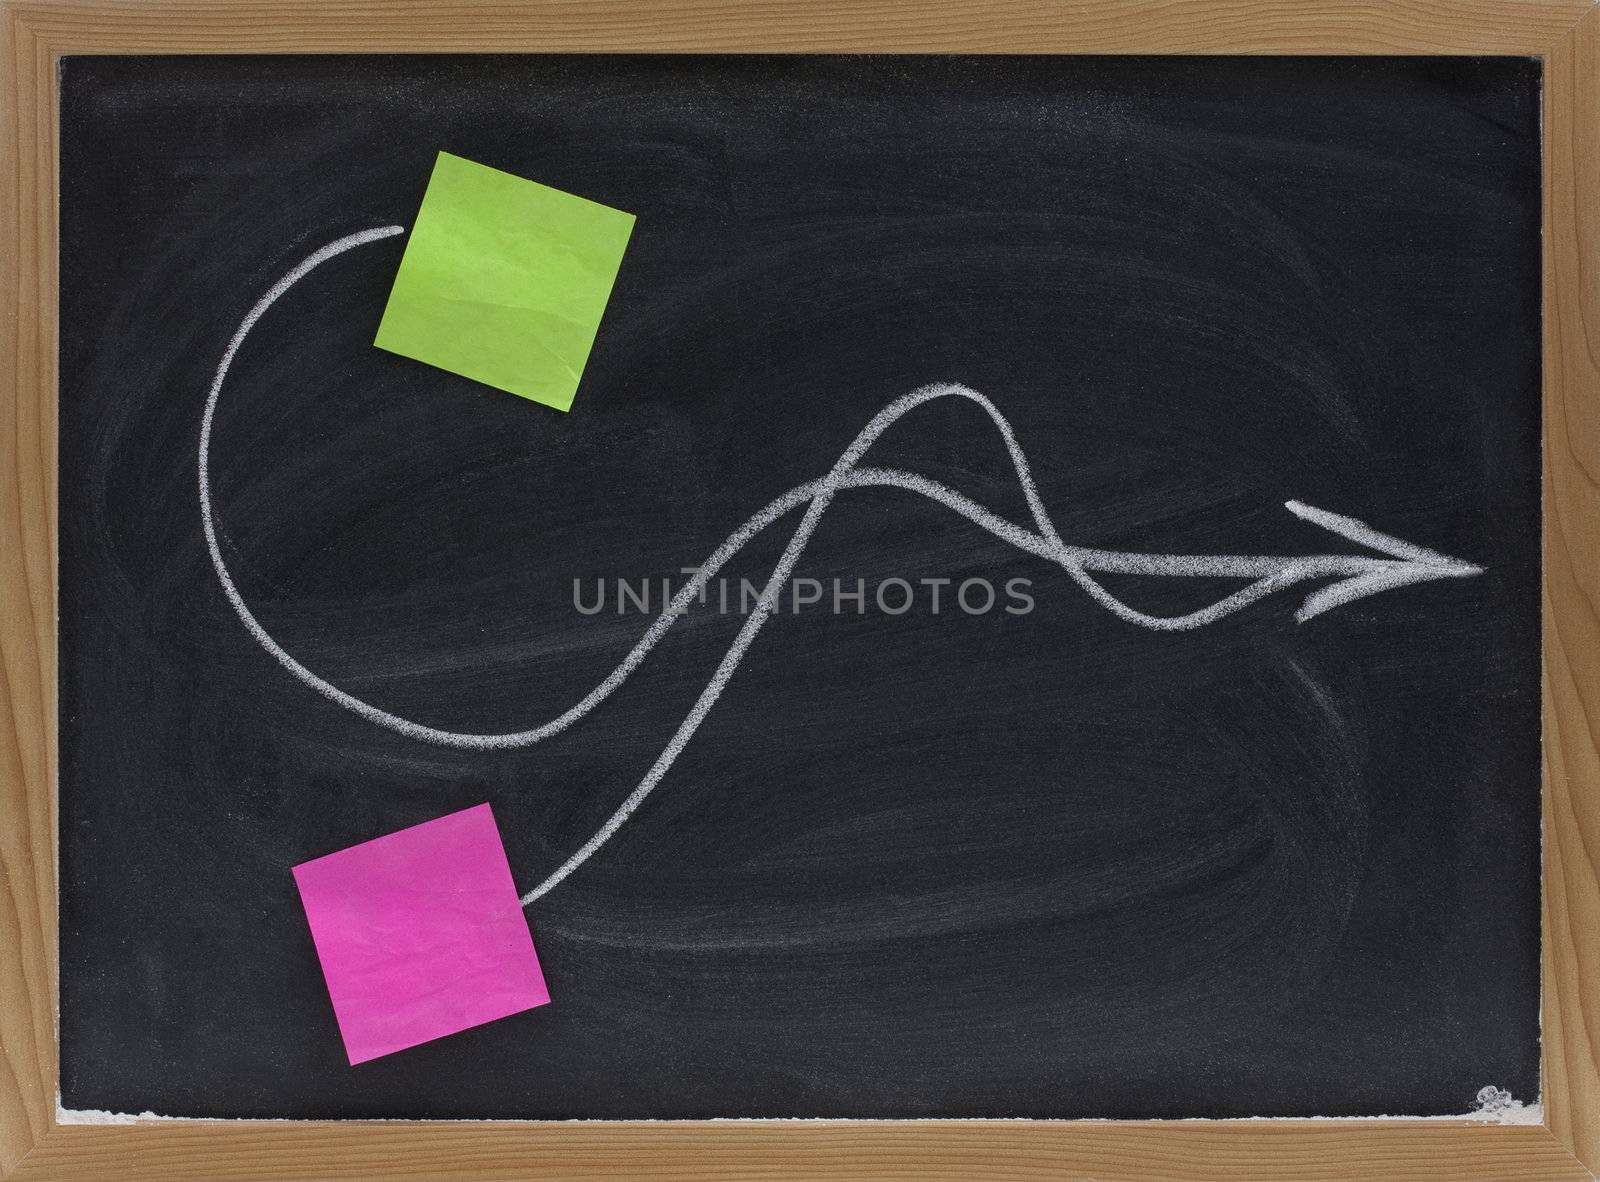 concept of joining pathways or being together presented on blackboard with white chalk and colorful sticky notes